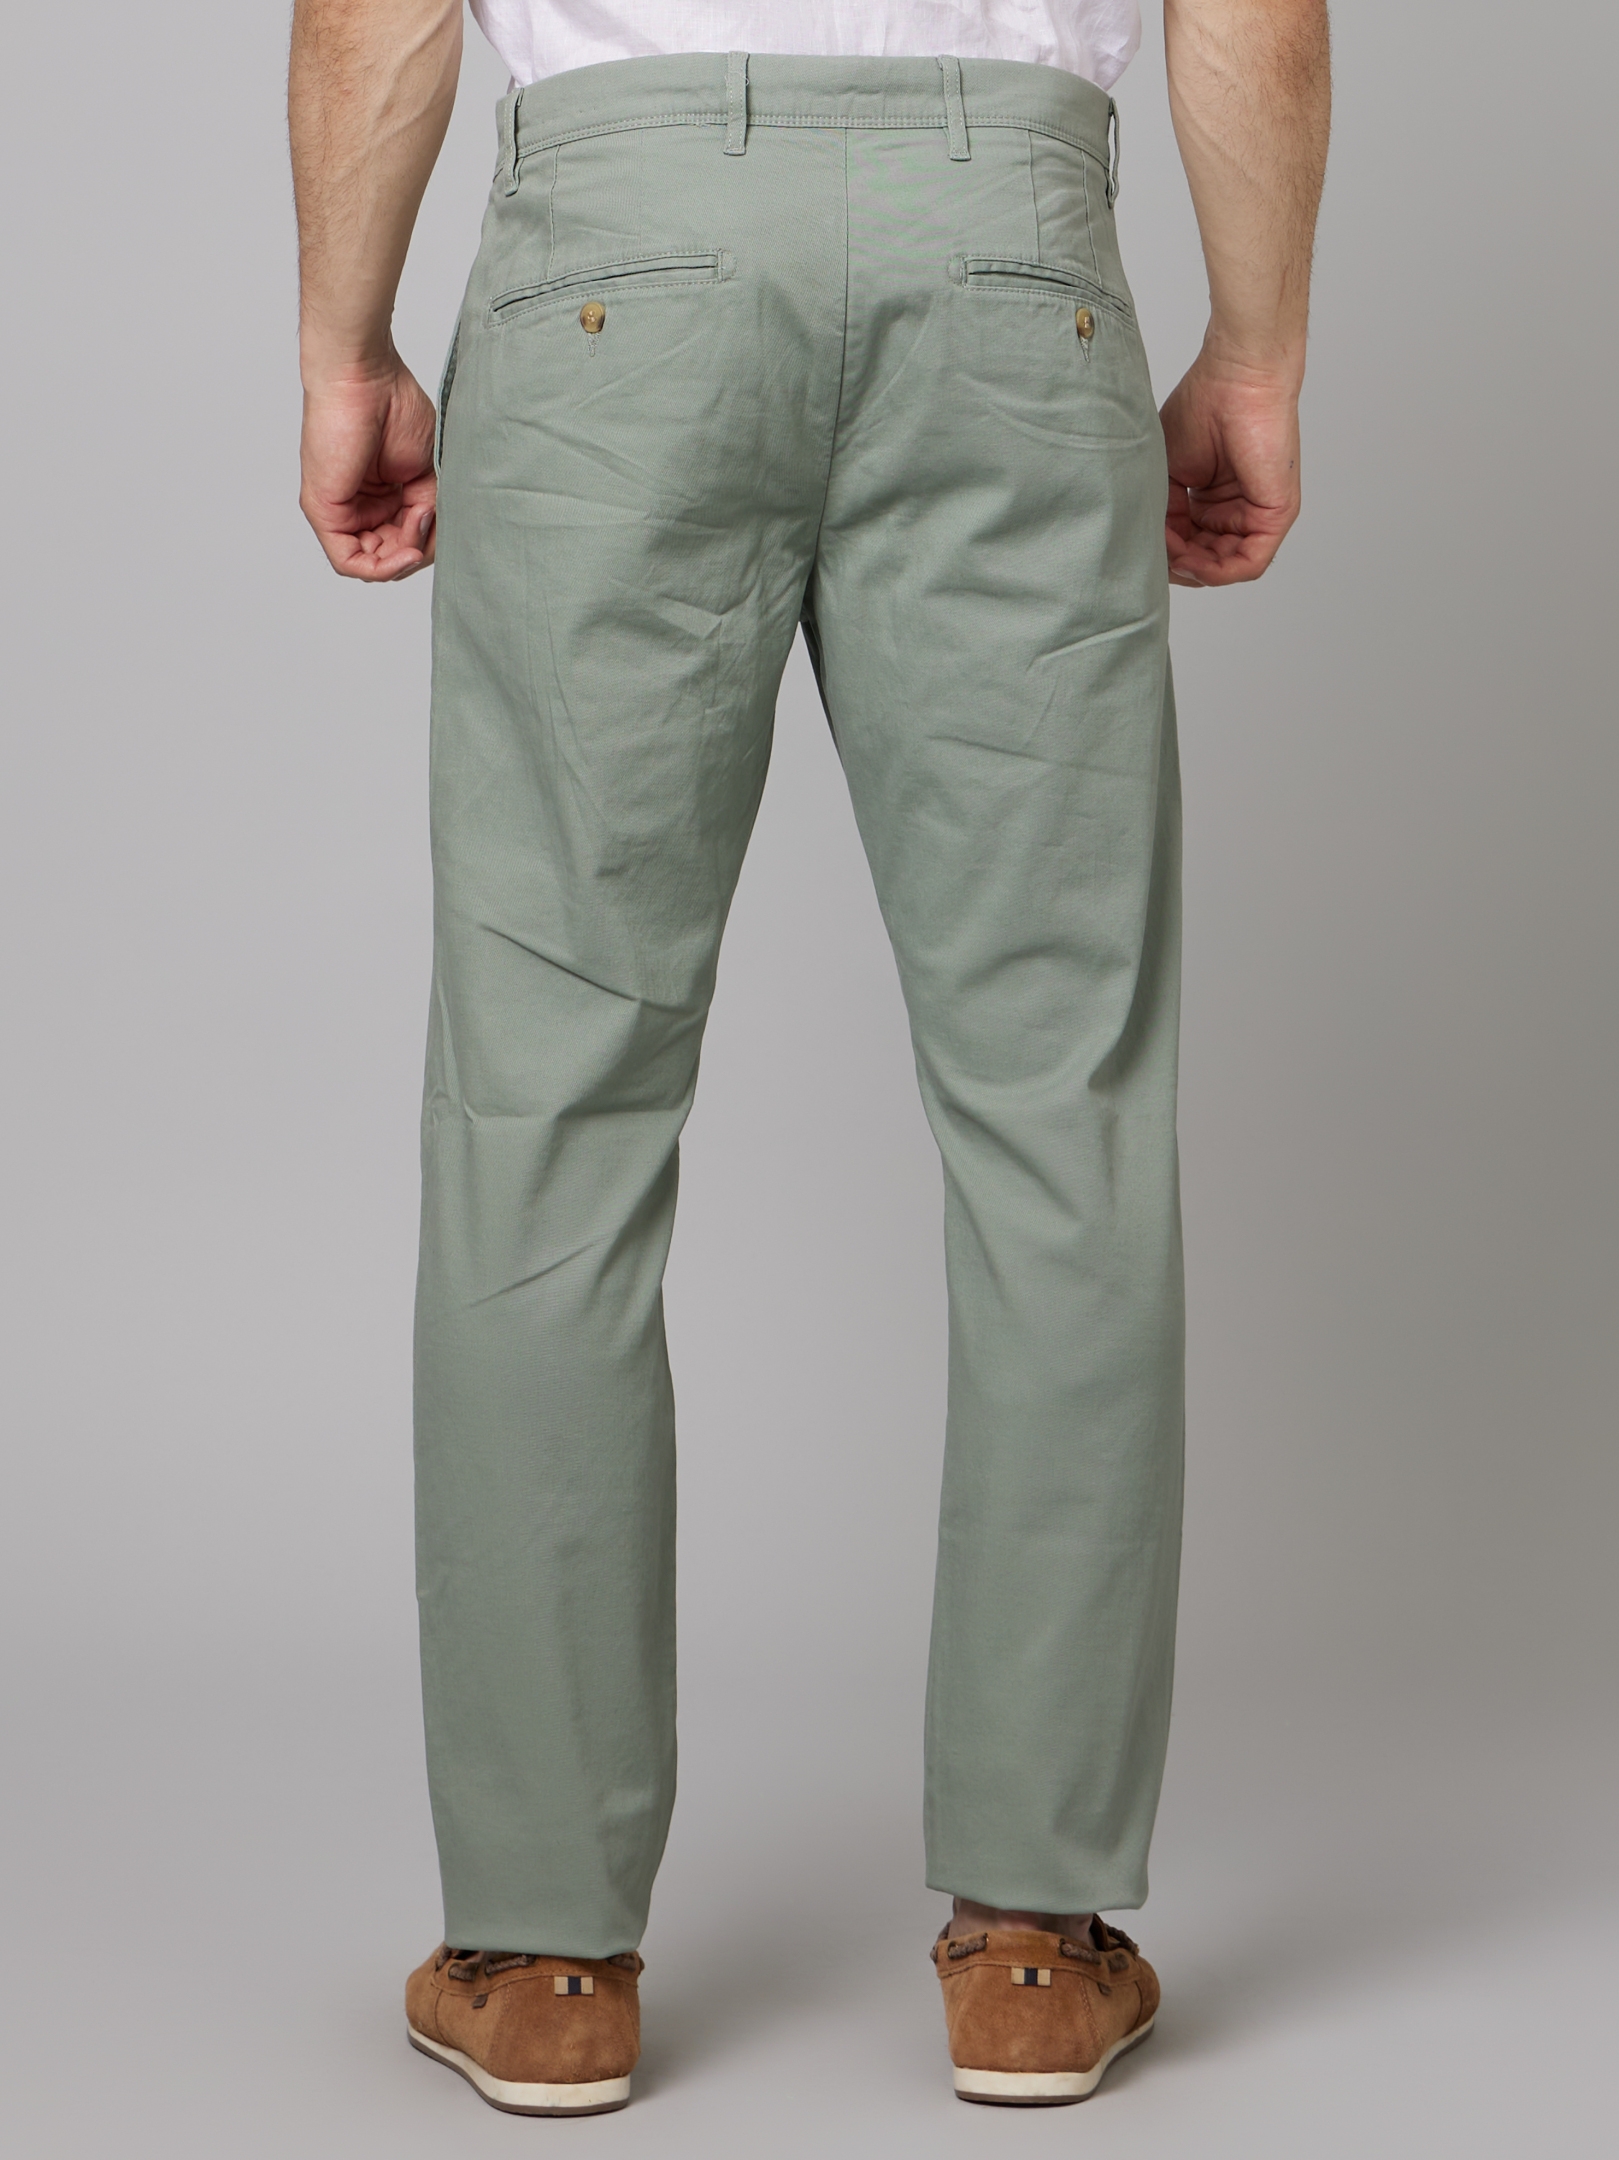 Loose Built-In Flex Rotation Chino Pants | Old Navy